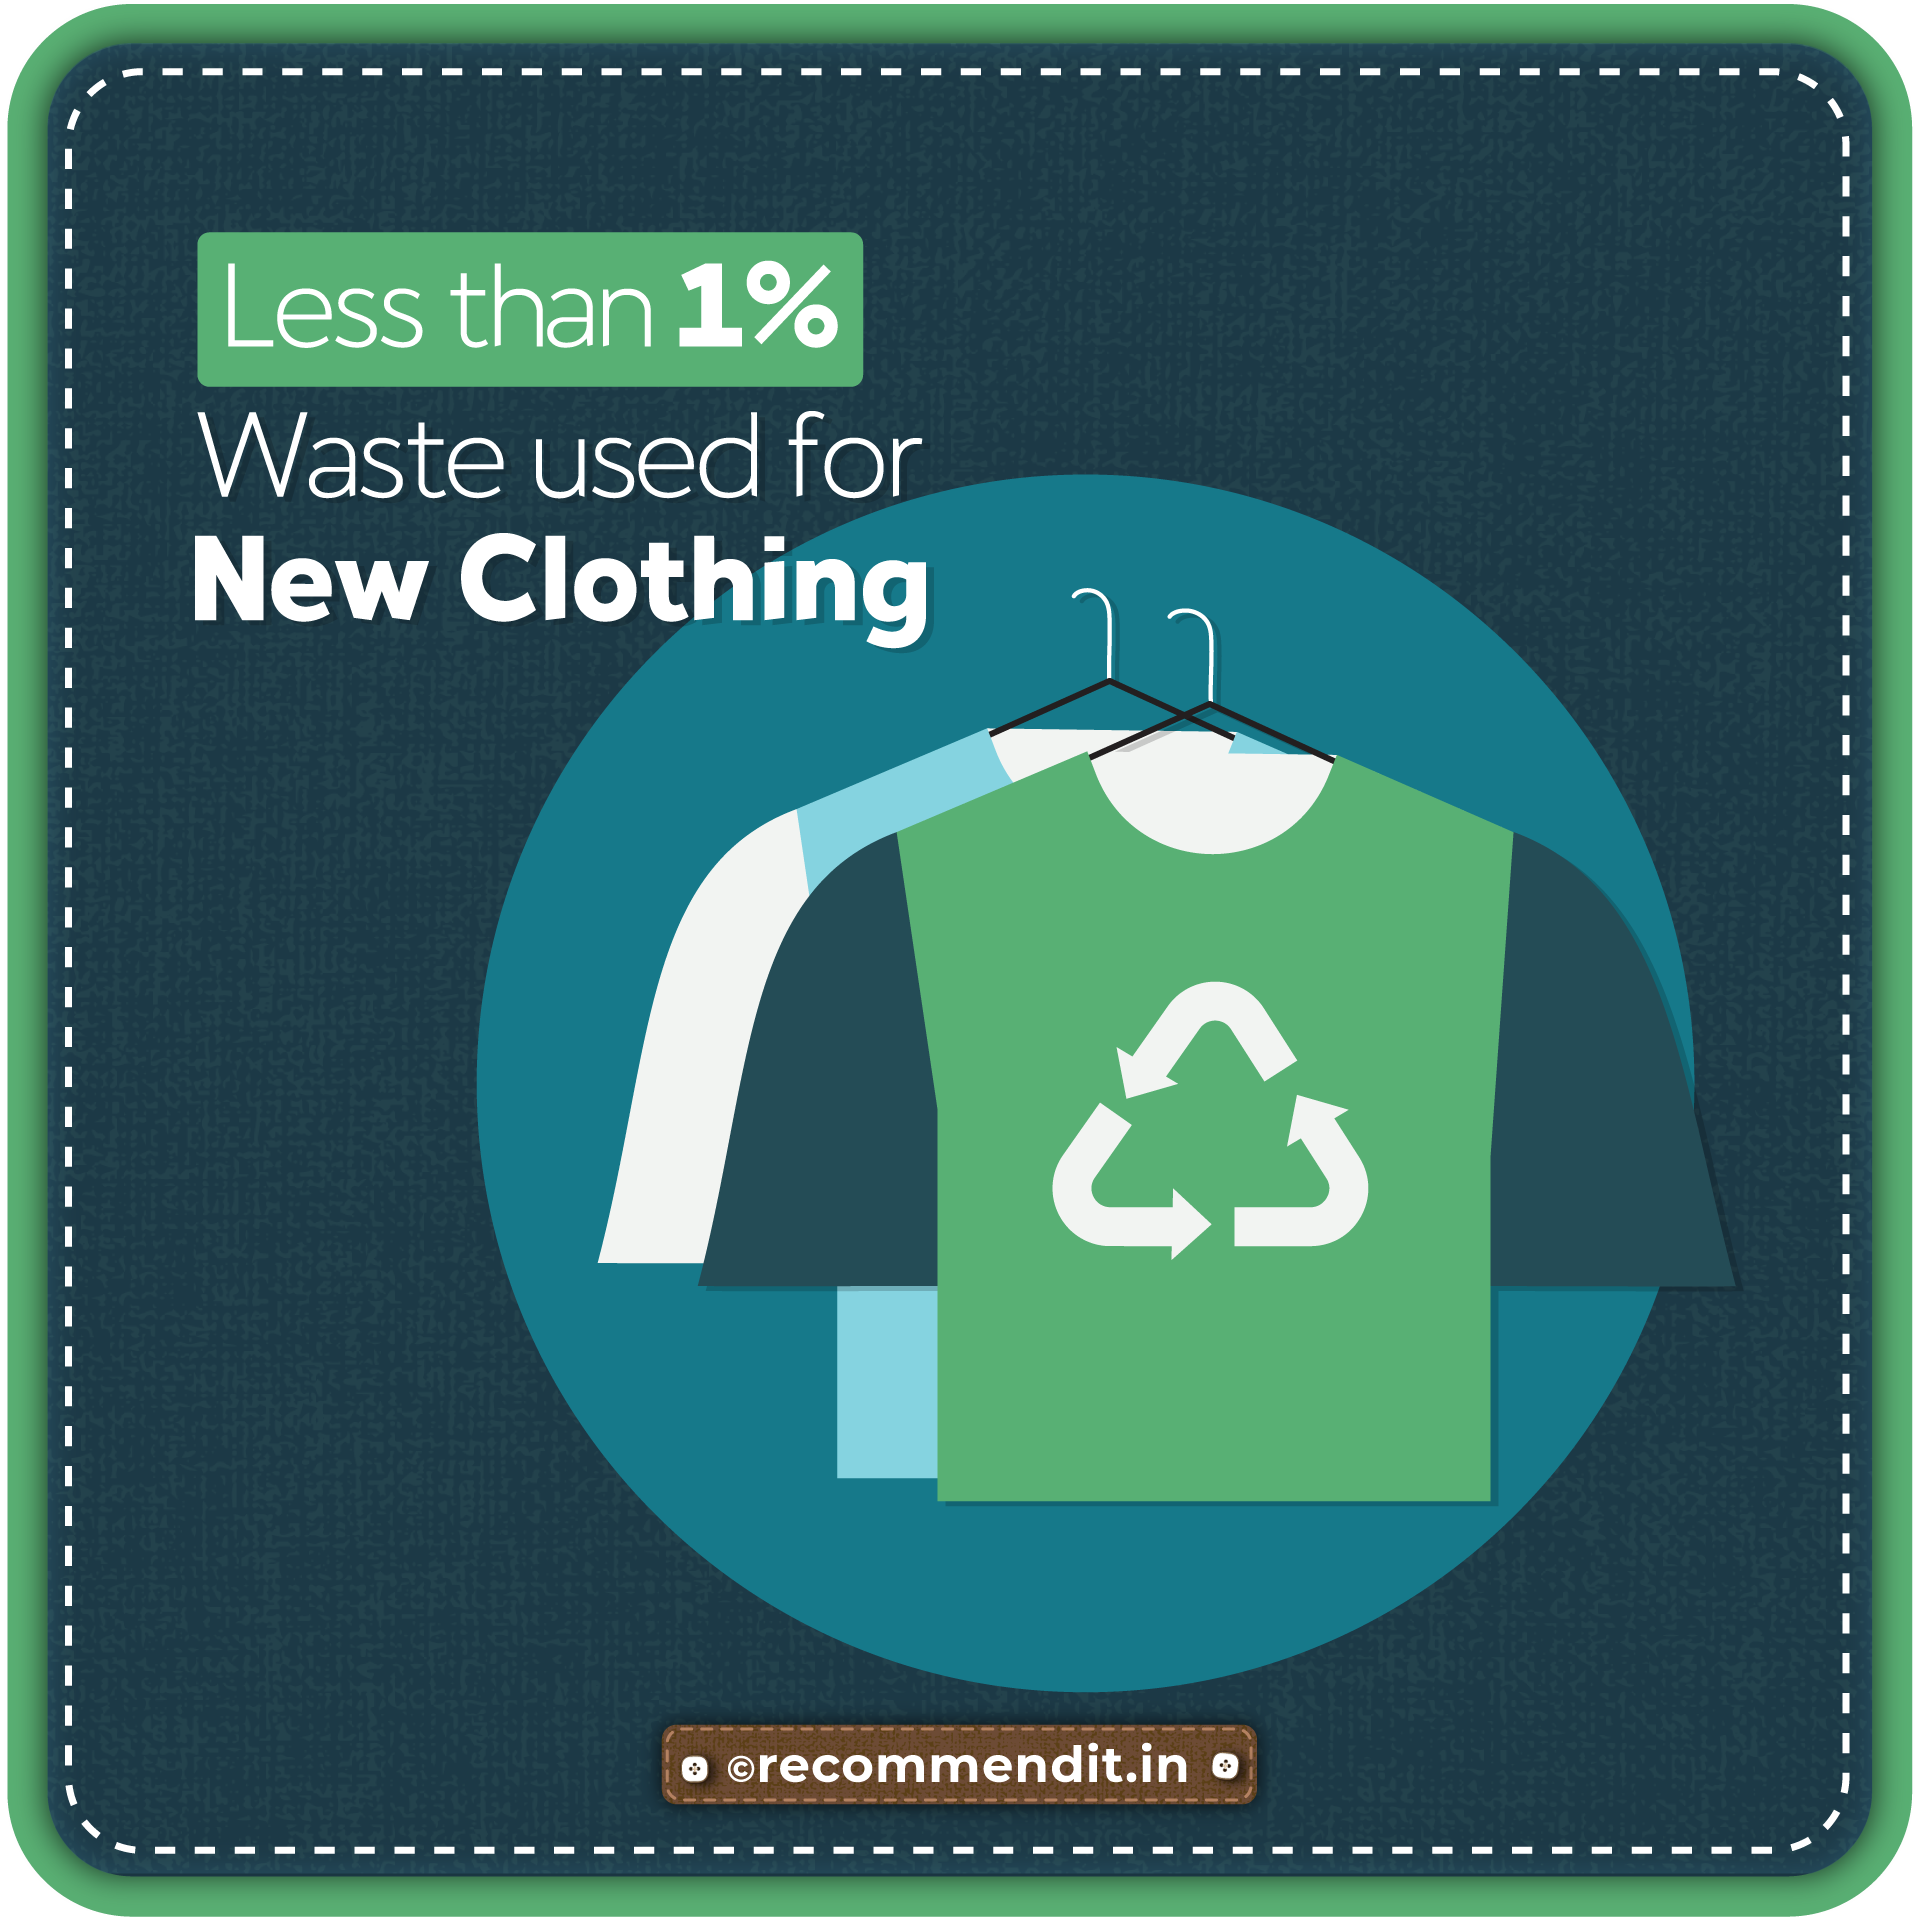 Waste used for new clothing